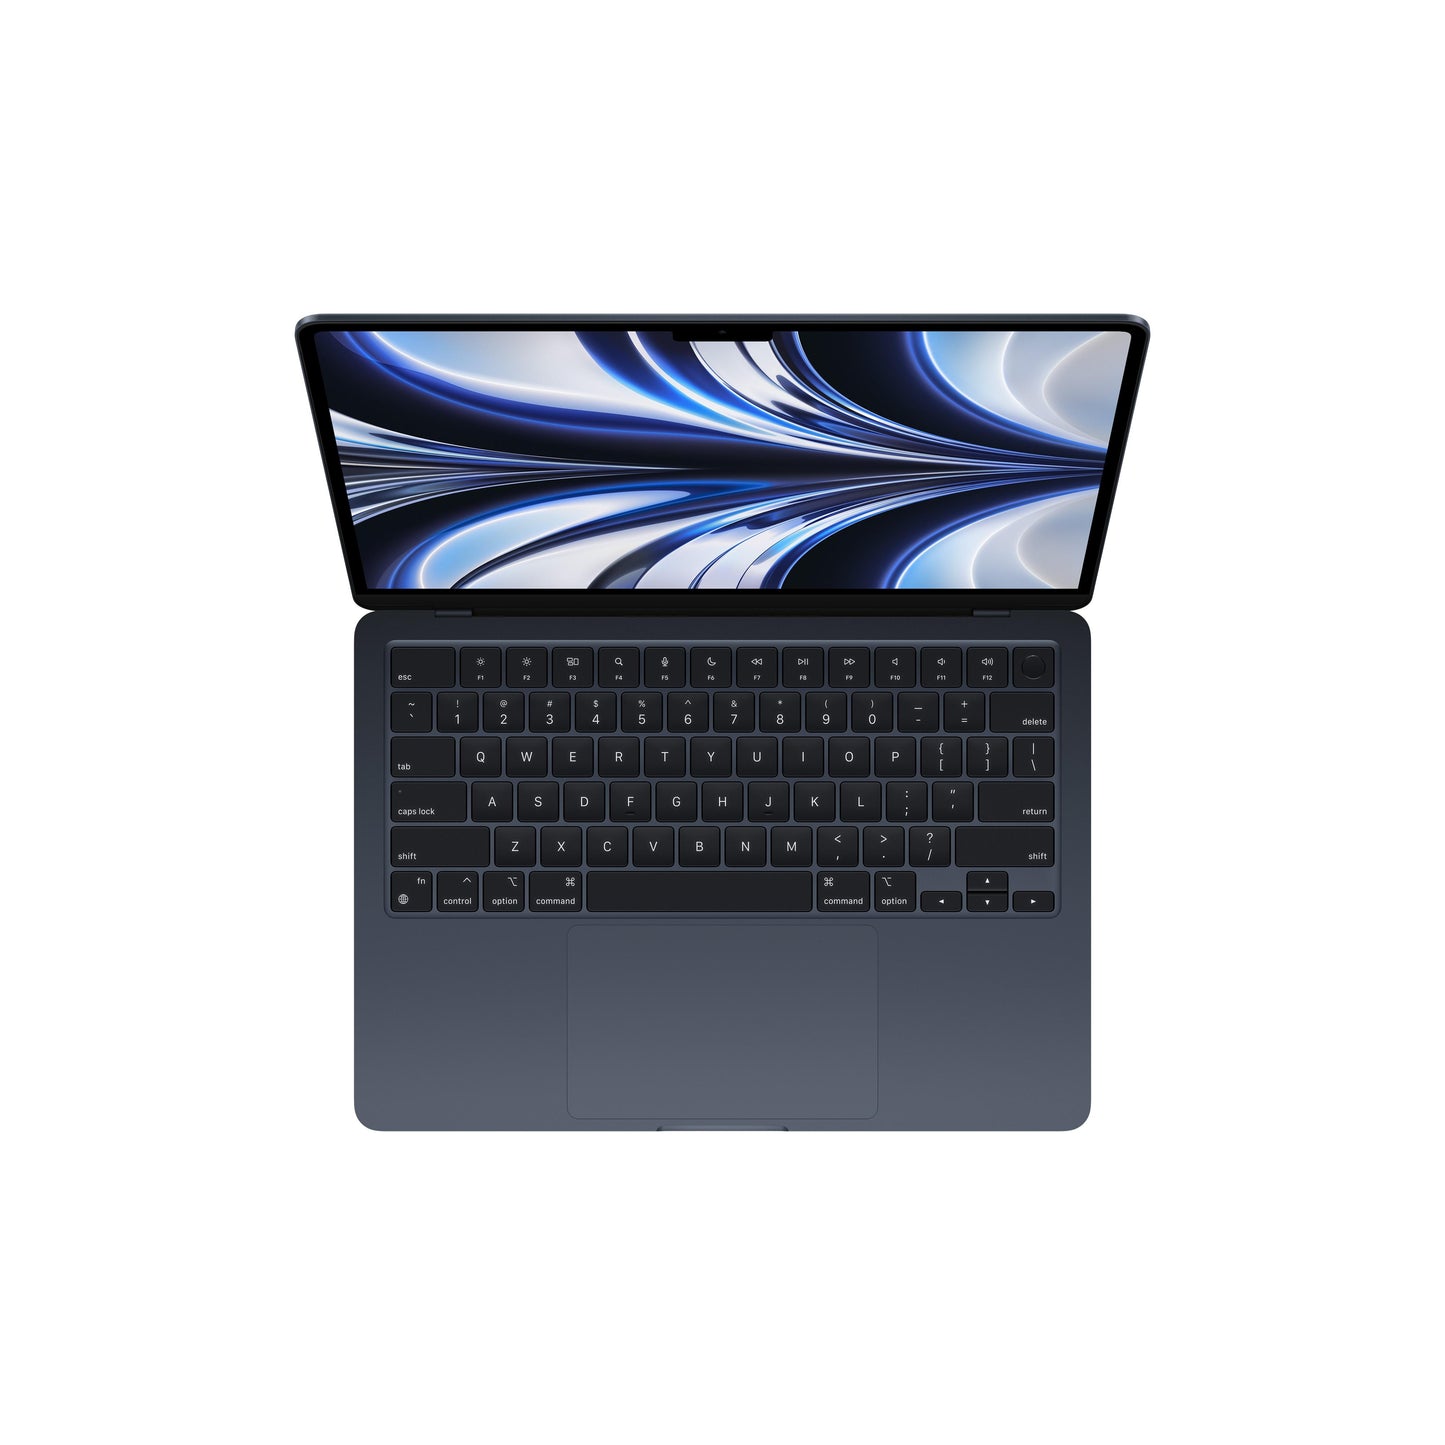 13-inch MacBook Air: Apple M2 chip with 8_core CPU and 8_core GPU, 256GB SSD - Midnight